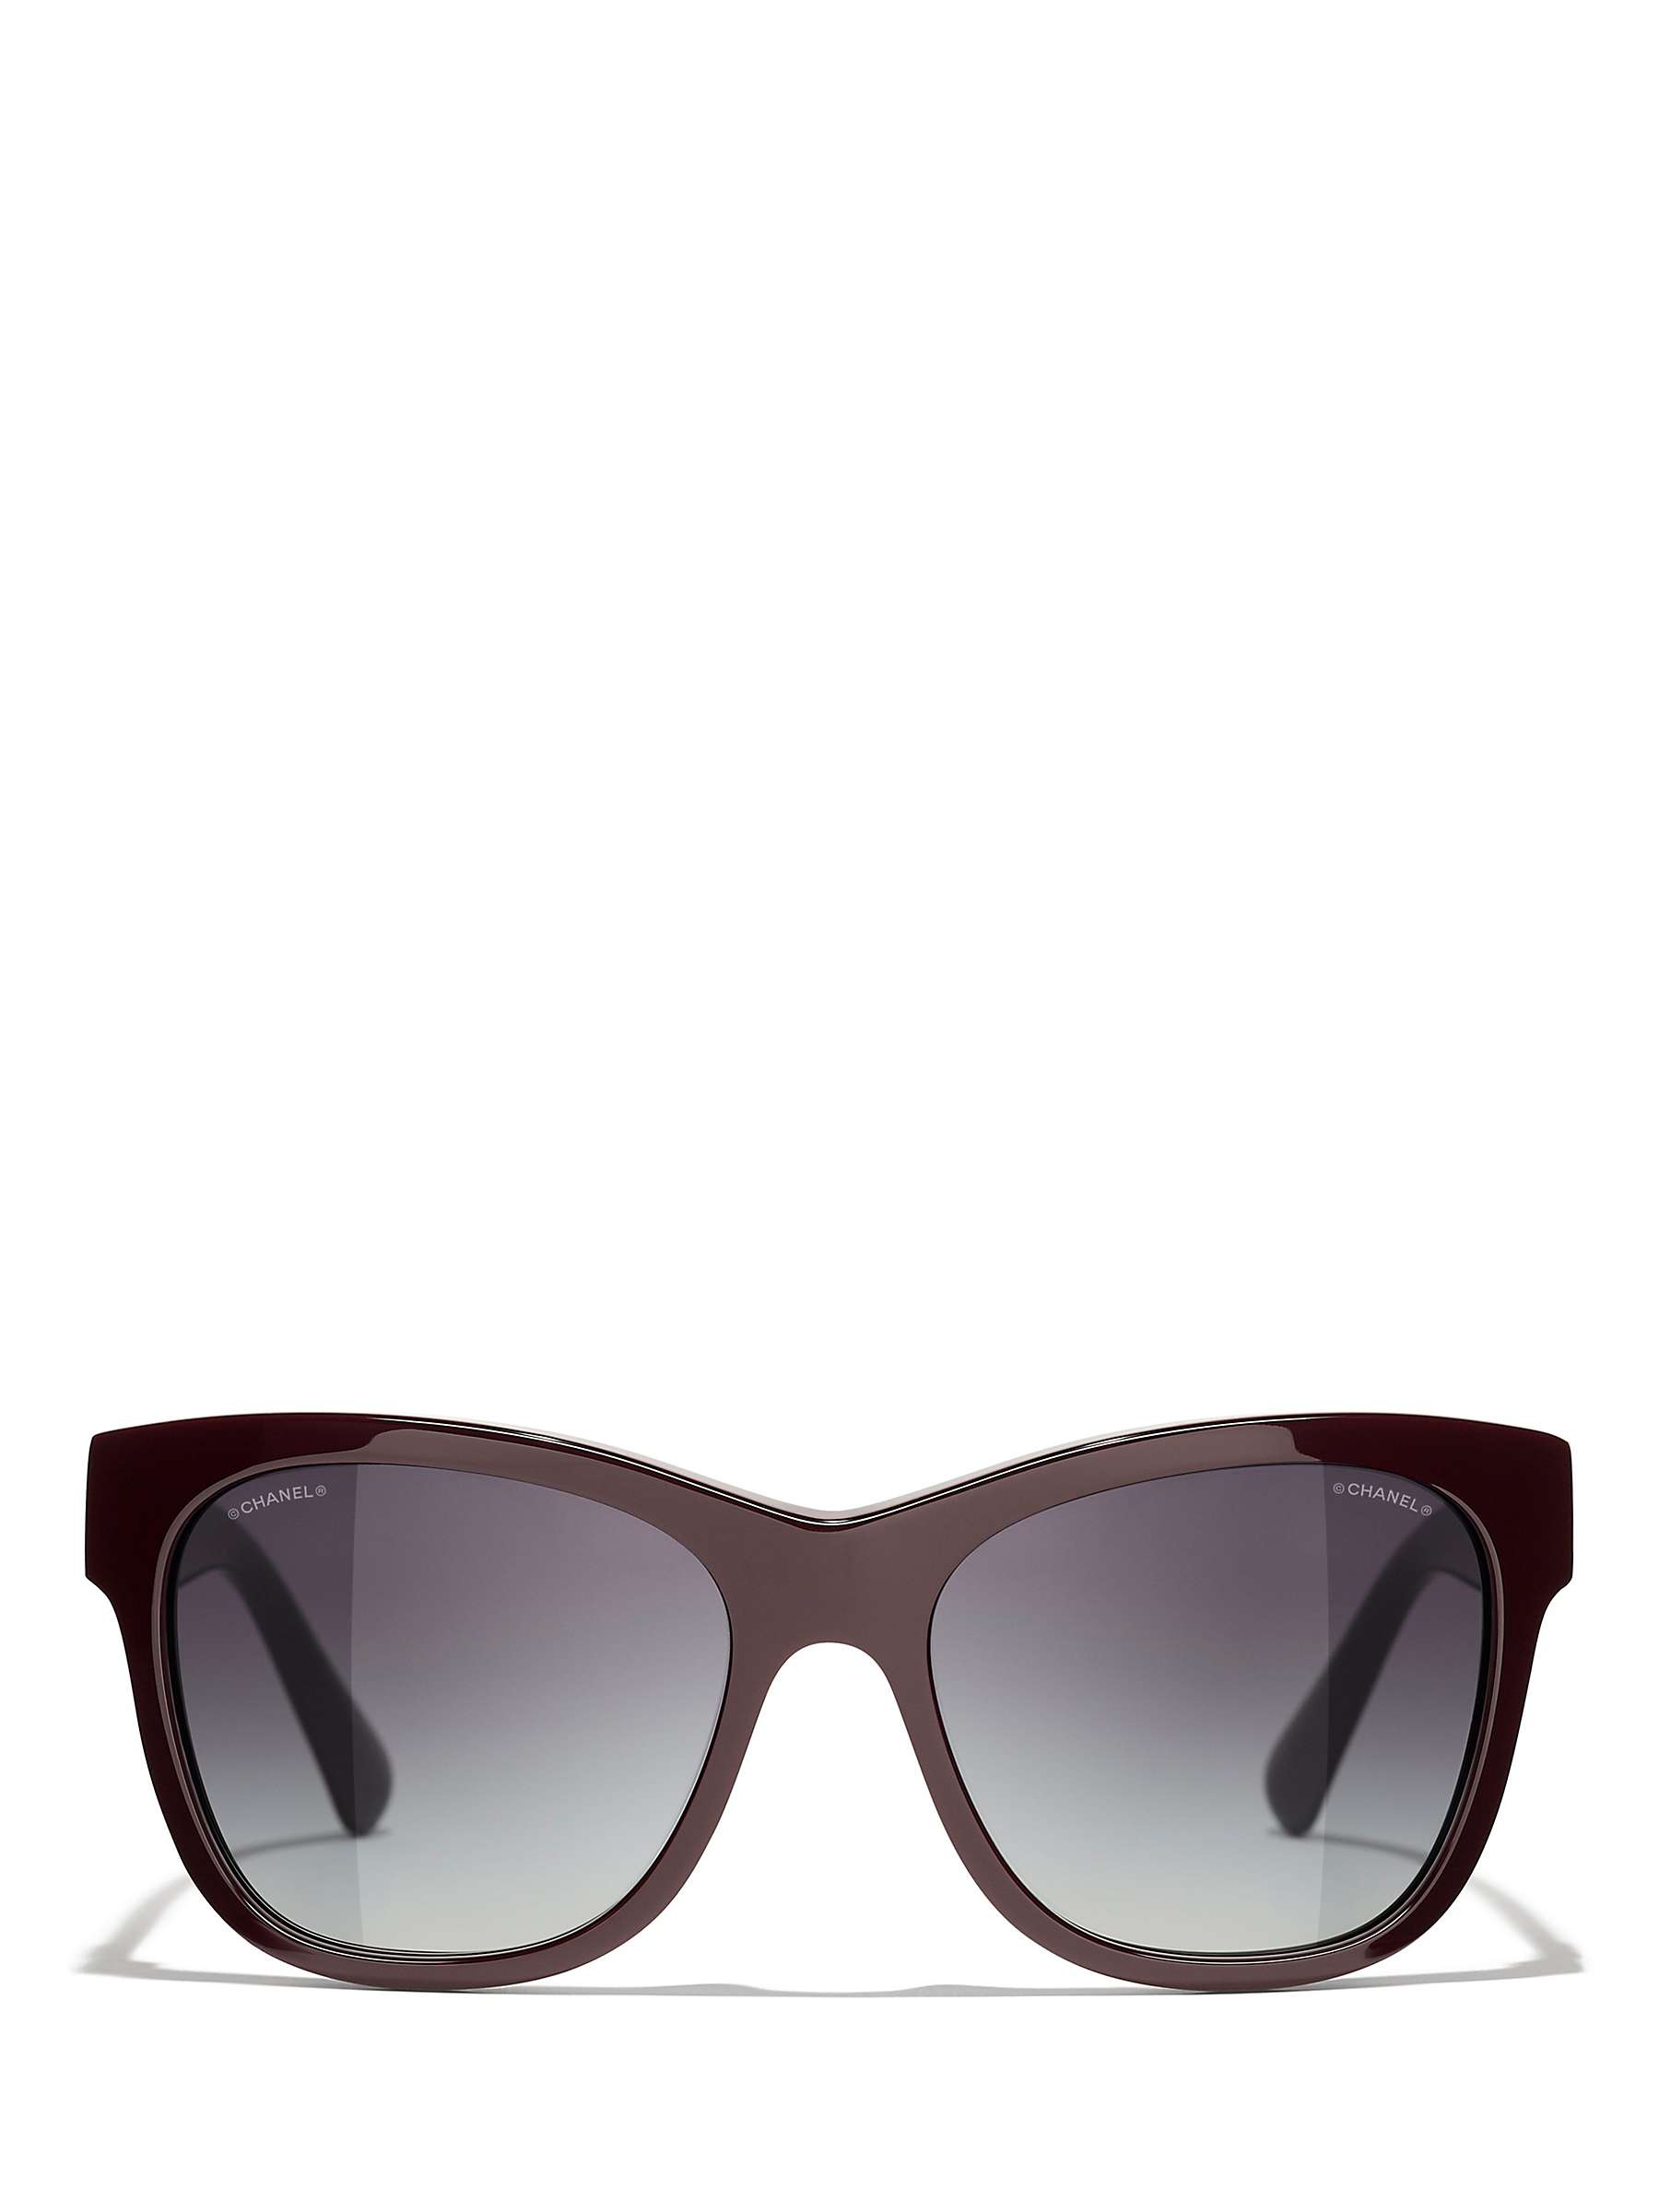 Buy CHANEL Square Sunglasses CH5380 Dark Red/Grey Gradient Online at johnlewis.com